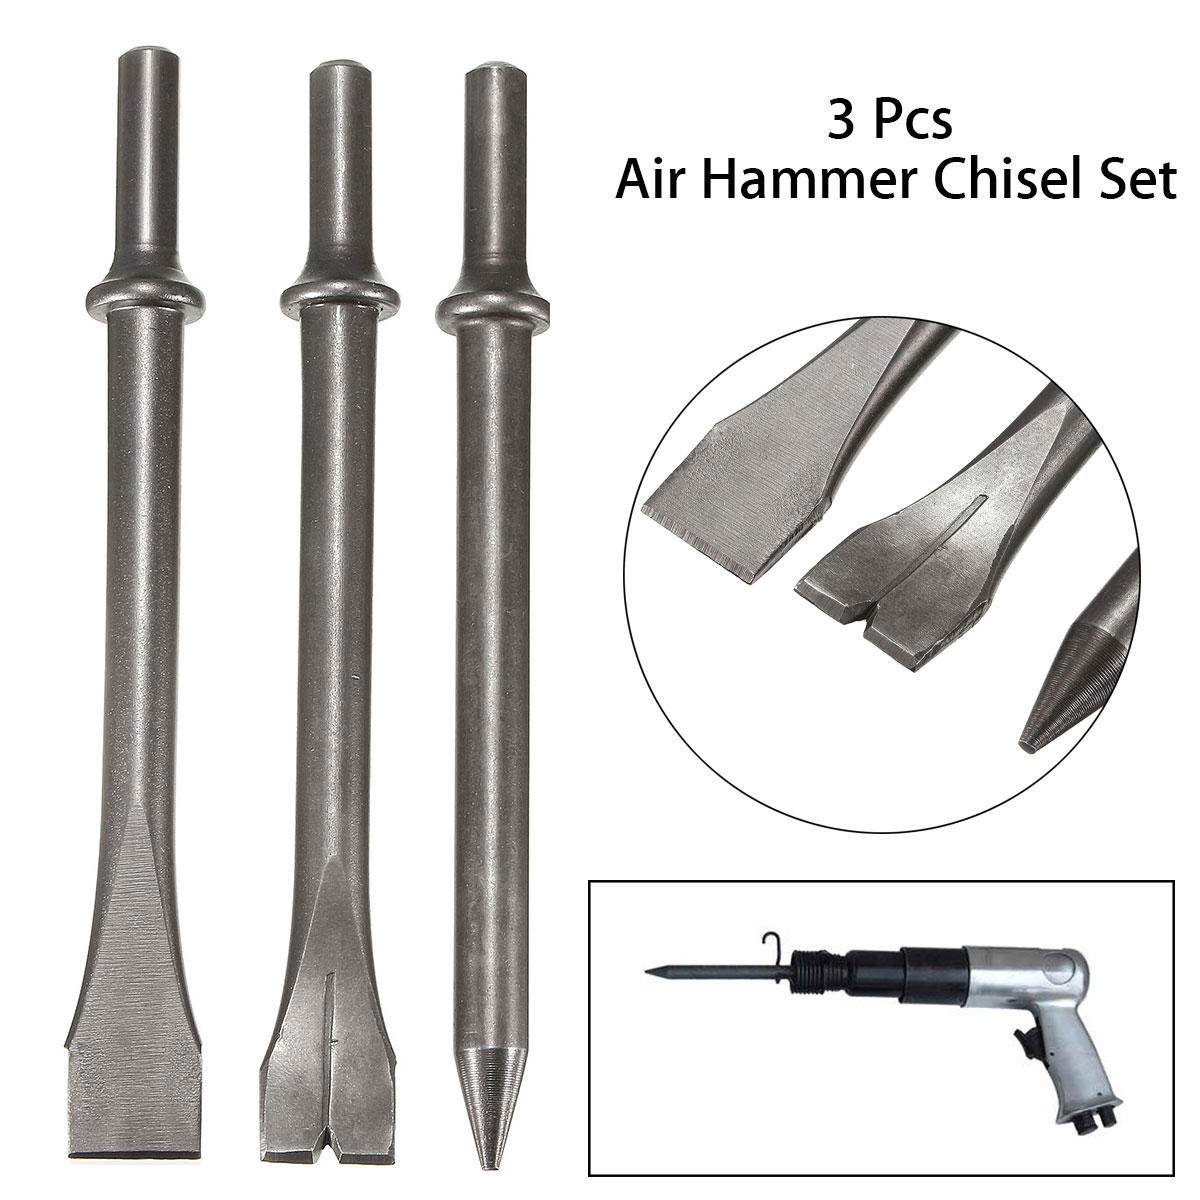 3 stuks 7 inch lengte luchthamers punch chipping beitel set ronde bar tool accessoire: